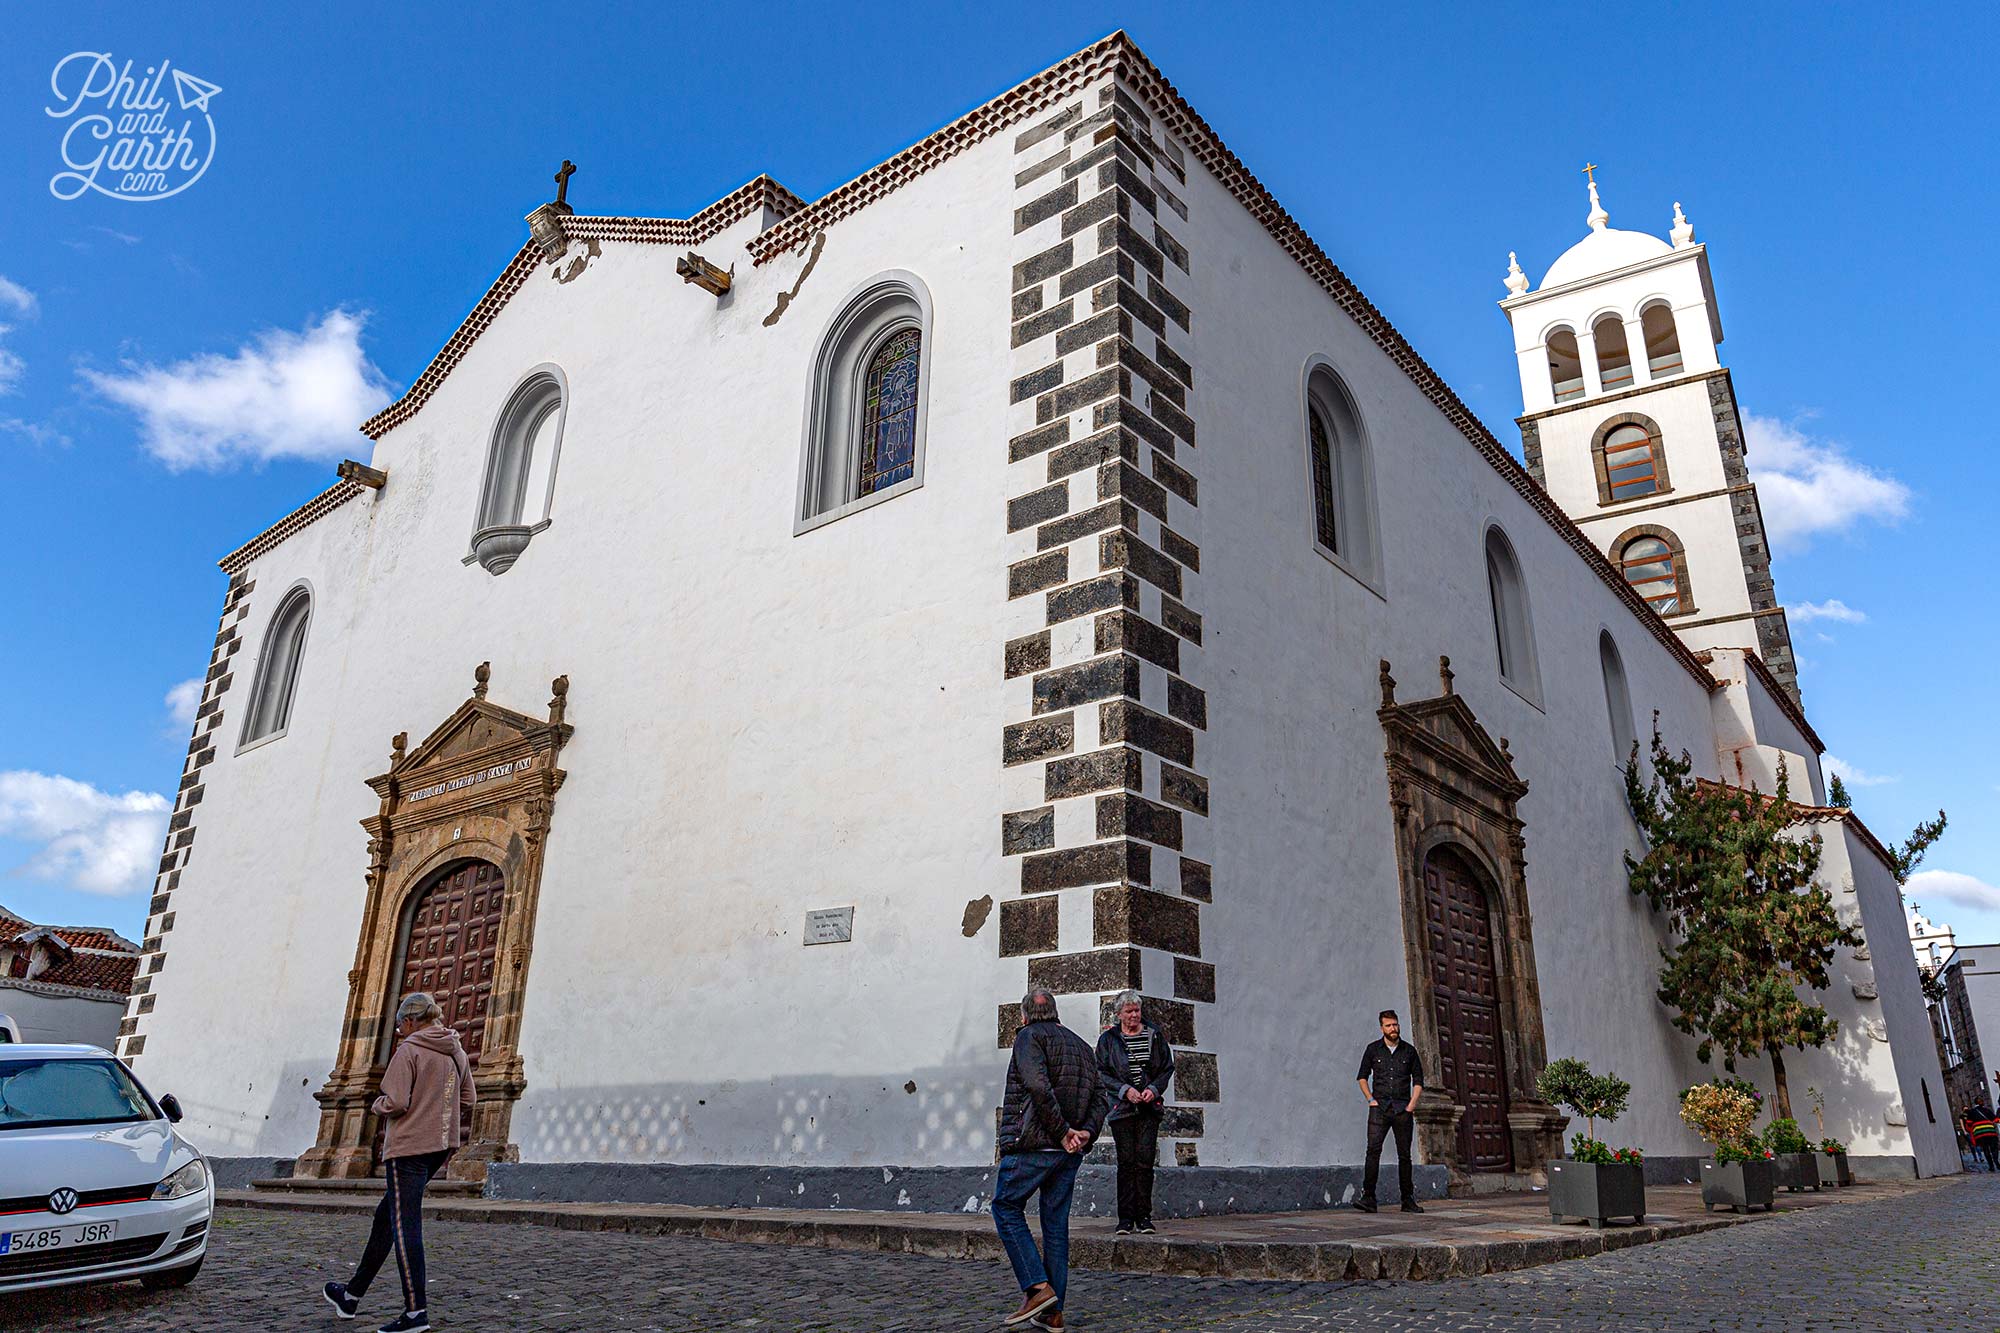 Iglesia de Santa Ana is Garachico's main church. Constructed in 1520, and rebuilt after the volcanic eruption in 1706